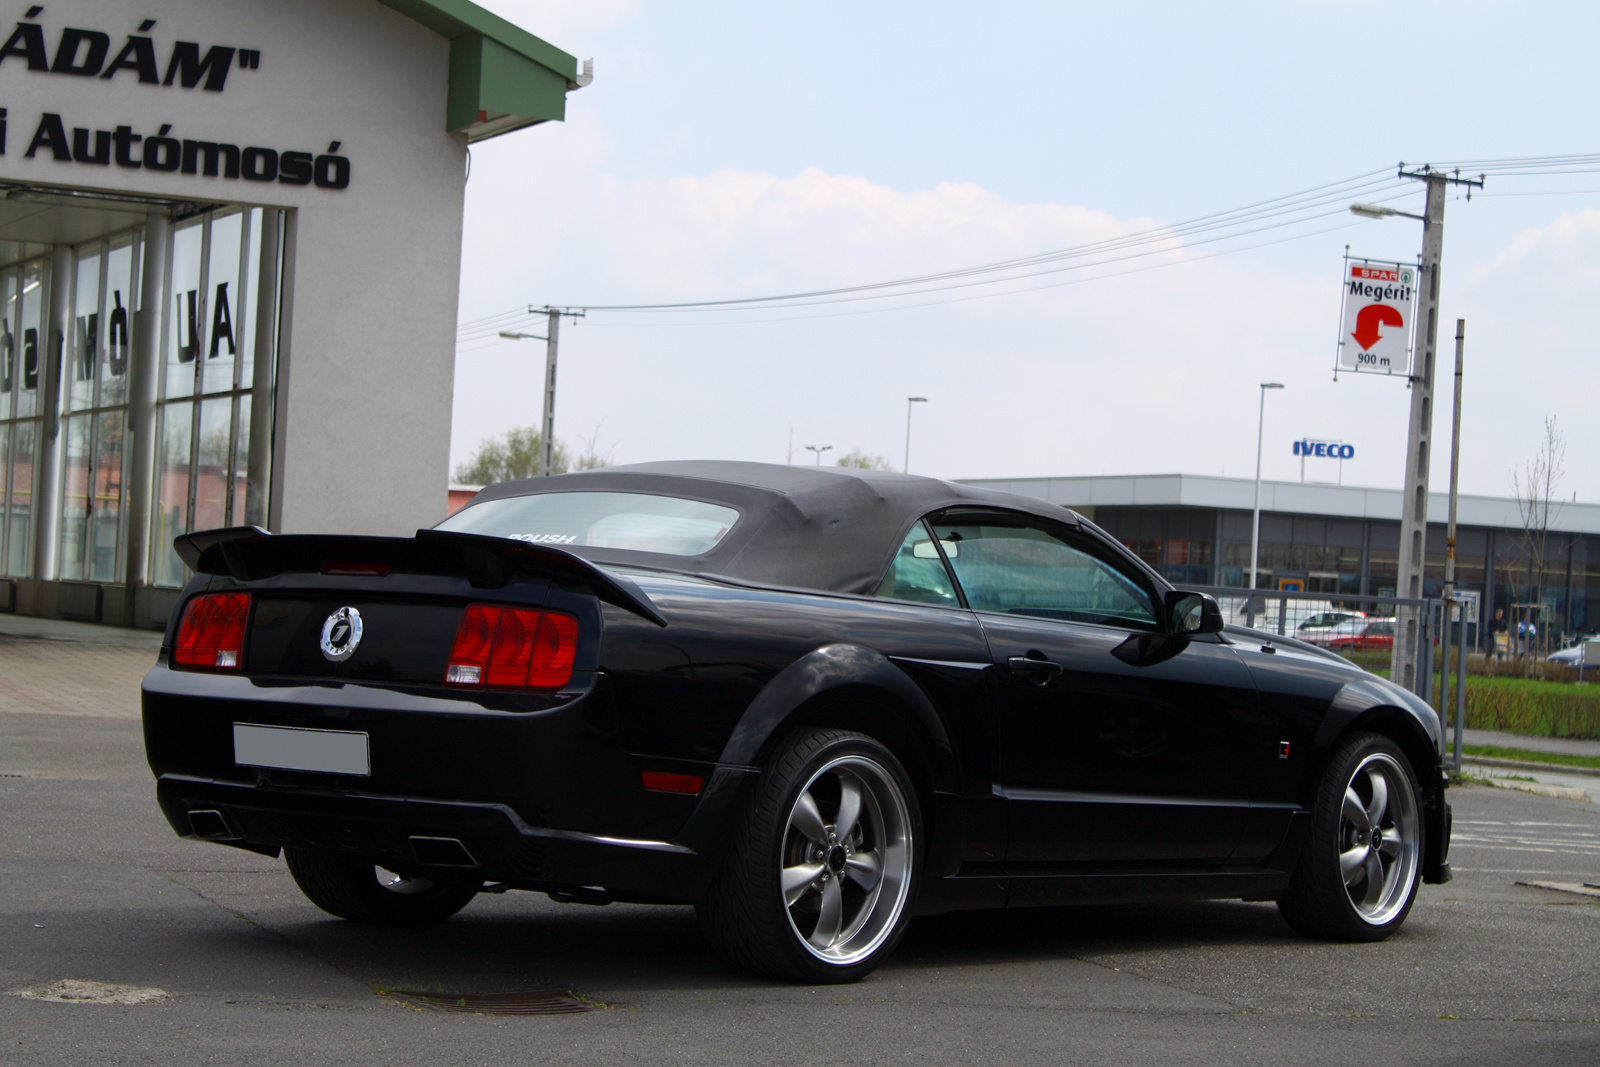 Ford Mustang Roush Stage 1 Convertible